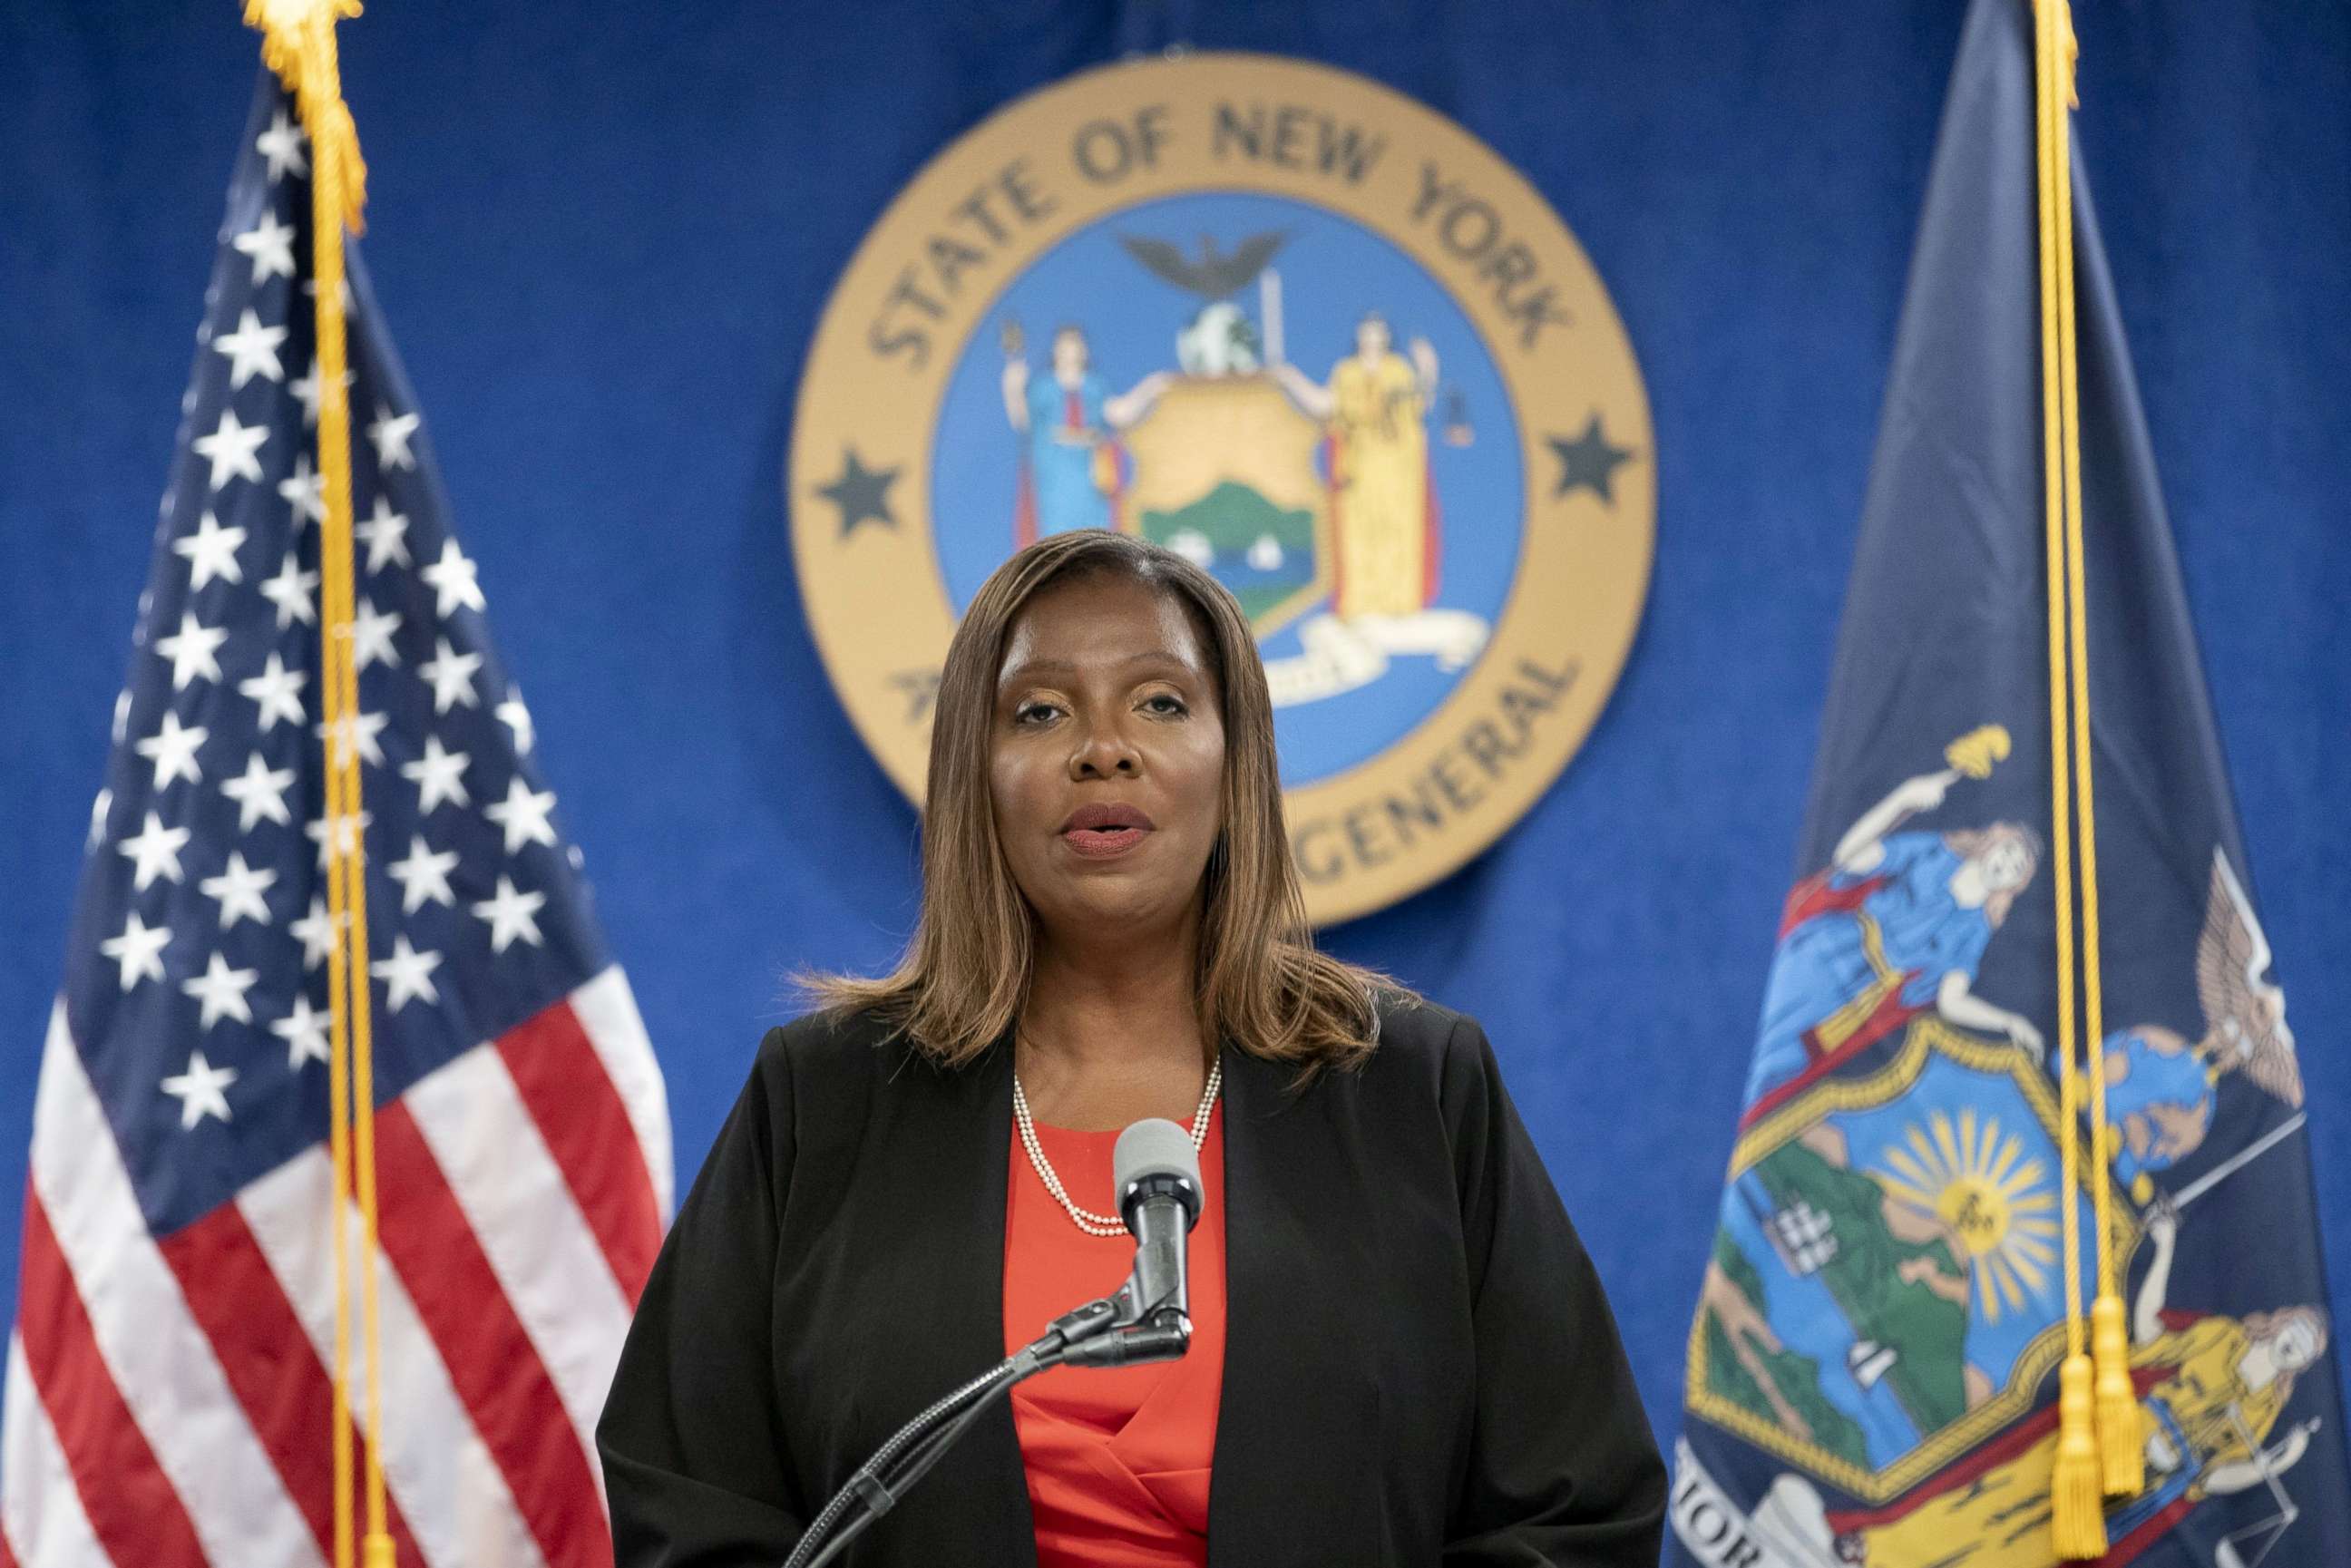 PHOTO: New York State Attorney General Letitia James speaks at a news conference, regarding a probe that found New York Governor Andrew Cuomo sexually harassed multiple women, in New York City, Aug. 3, 2021.